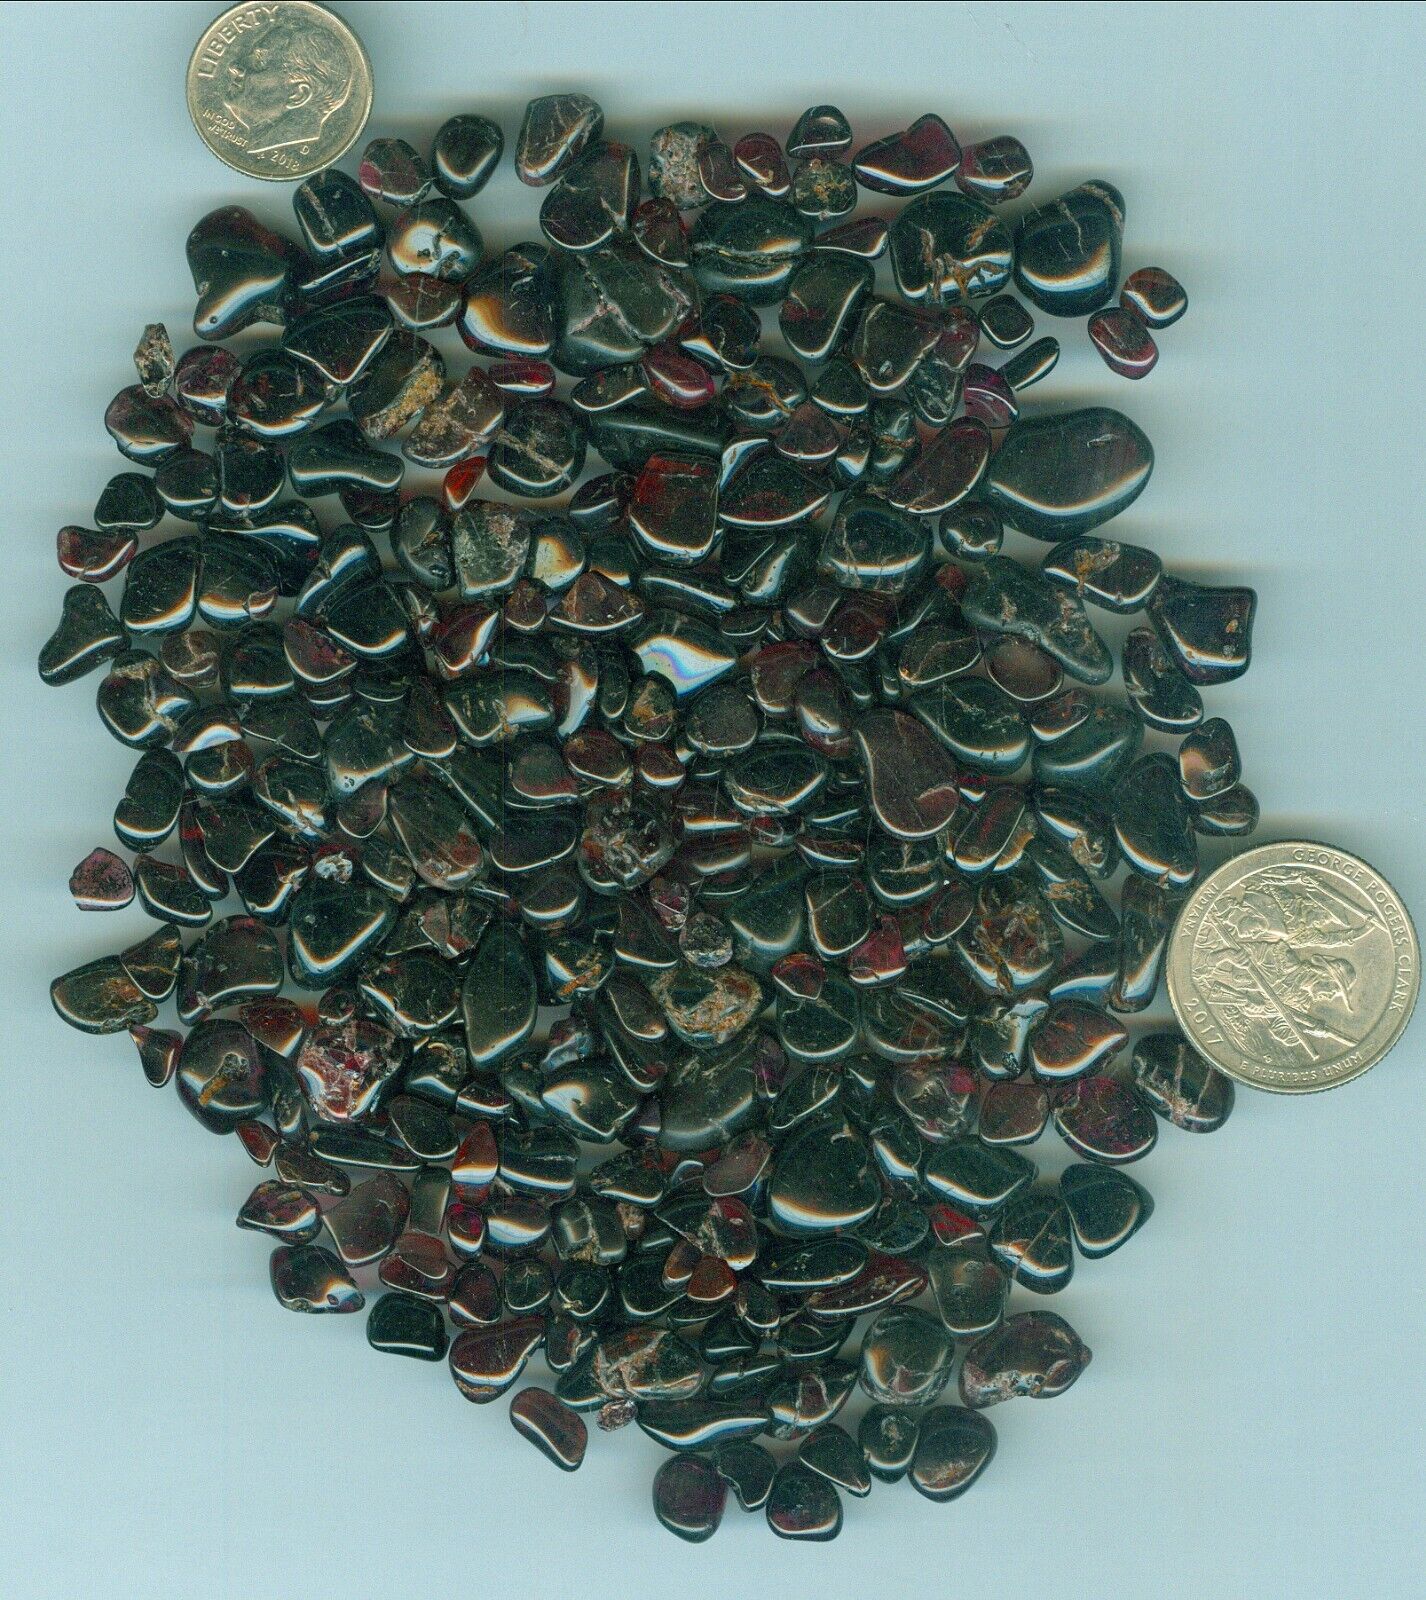 232 Grams of Natural Garnet Tumbled and Polished Pieces 8mm to 12mm Garnet rough